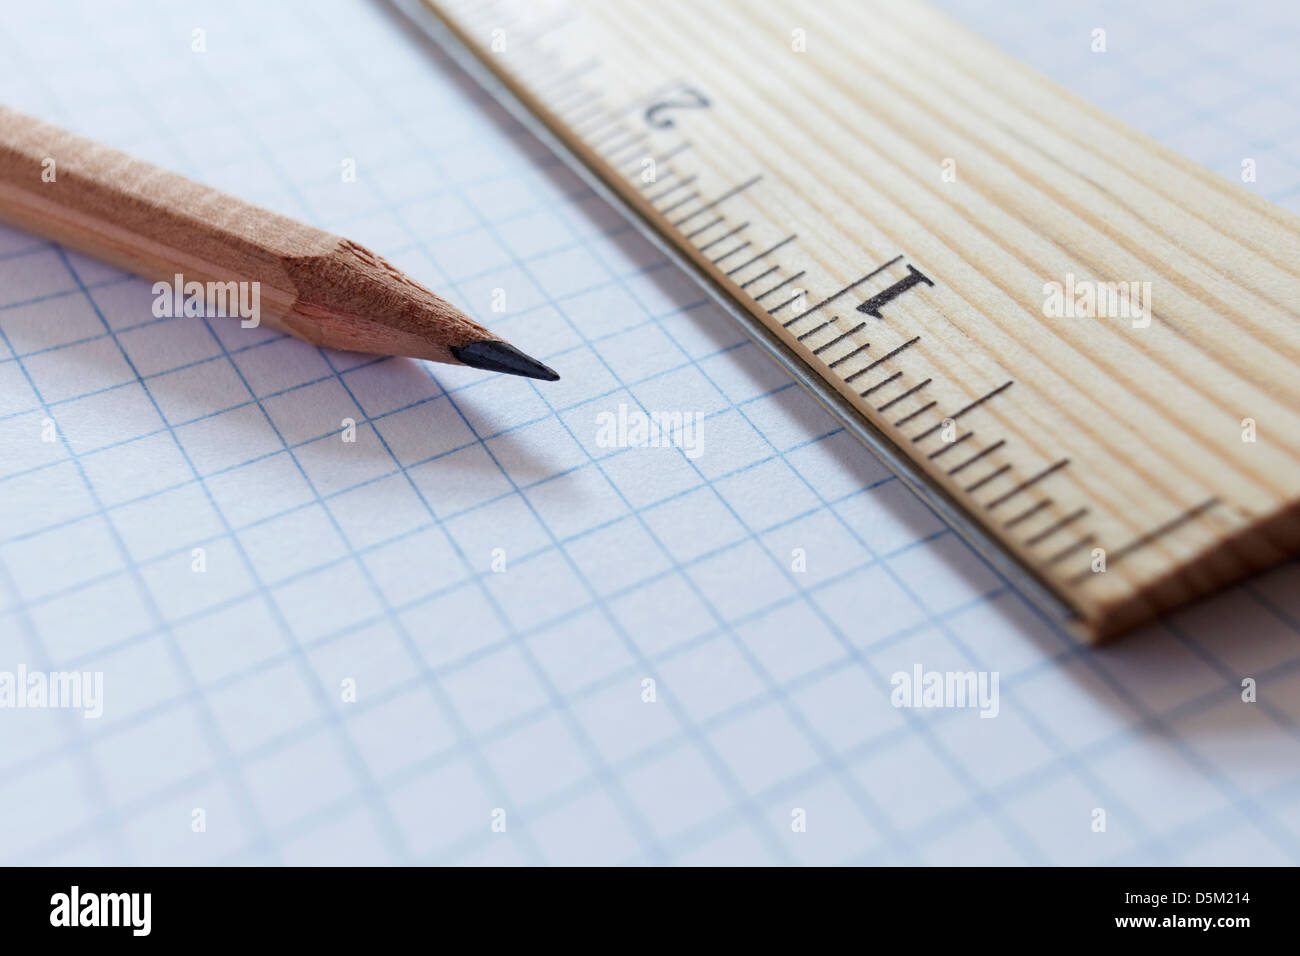 Ruler and pencil on graph paper, studio shot Stock Photo